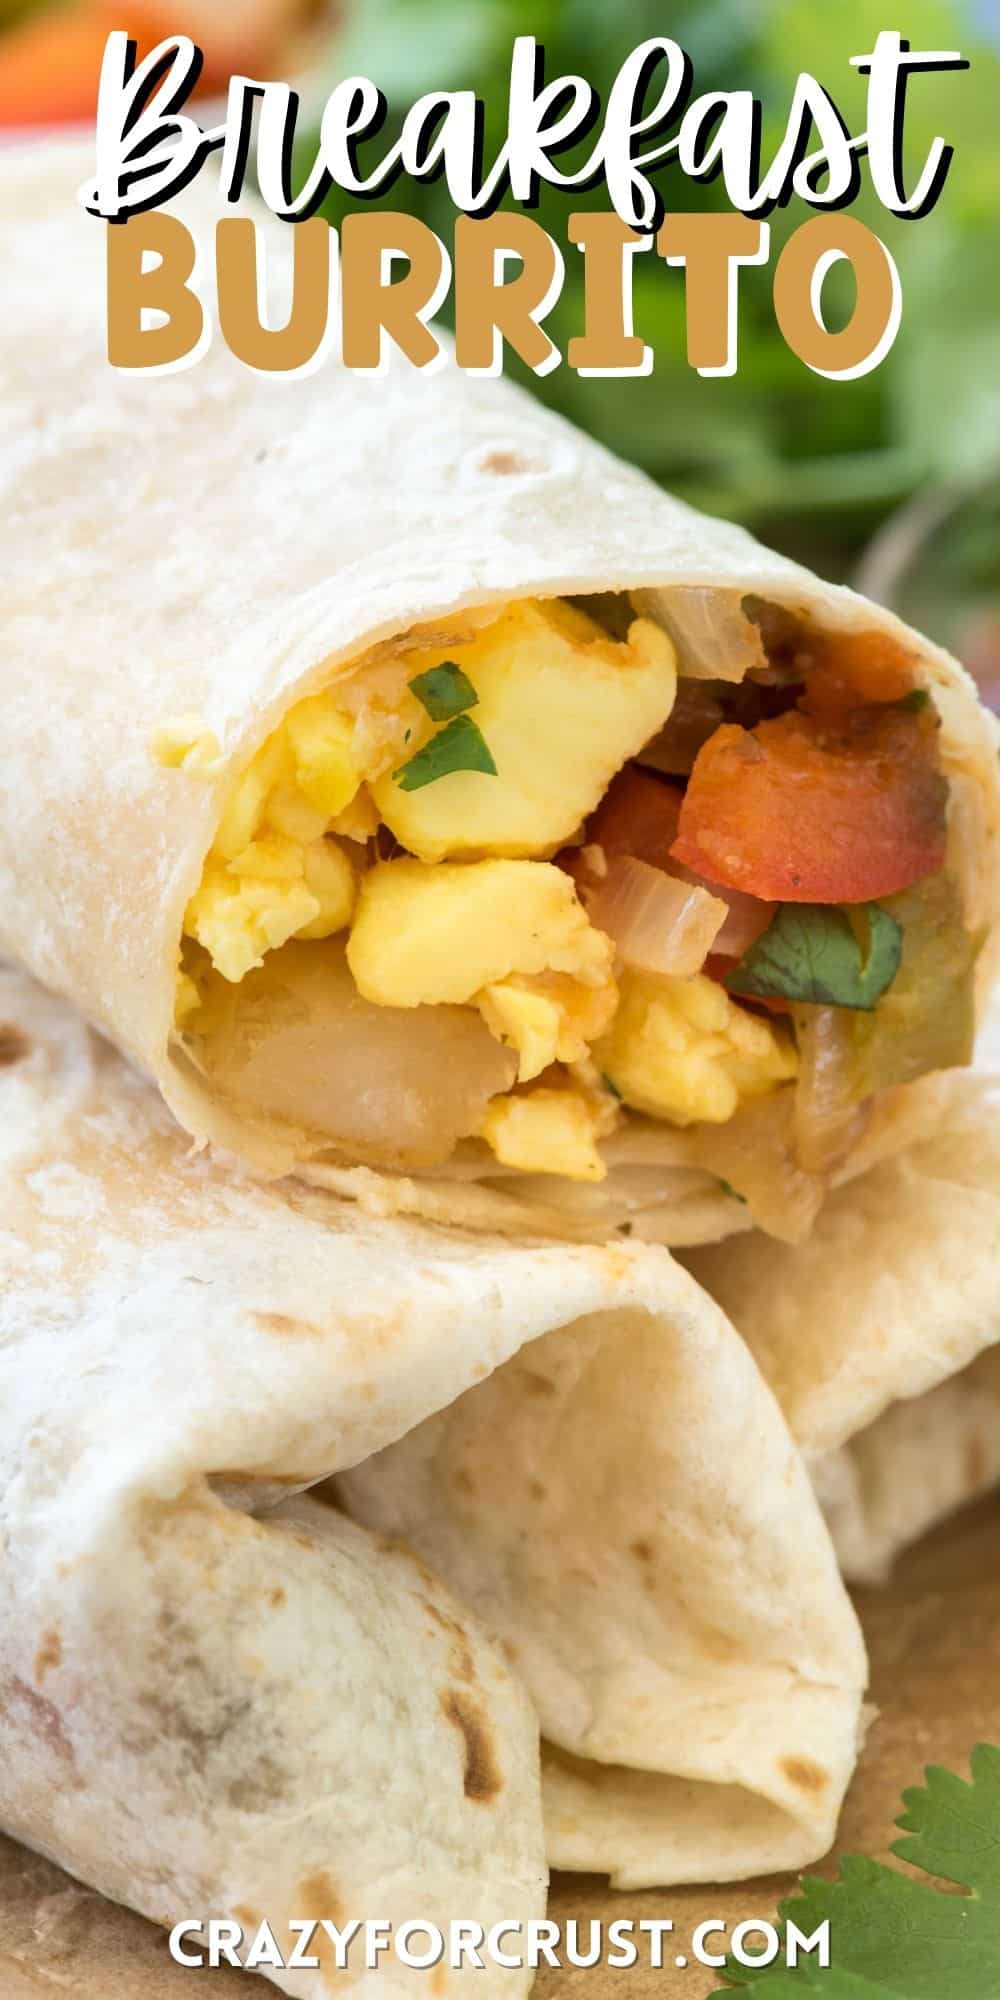 burrito stuffed with eggs and veggies with words on top of the image